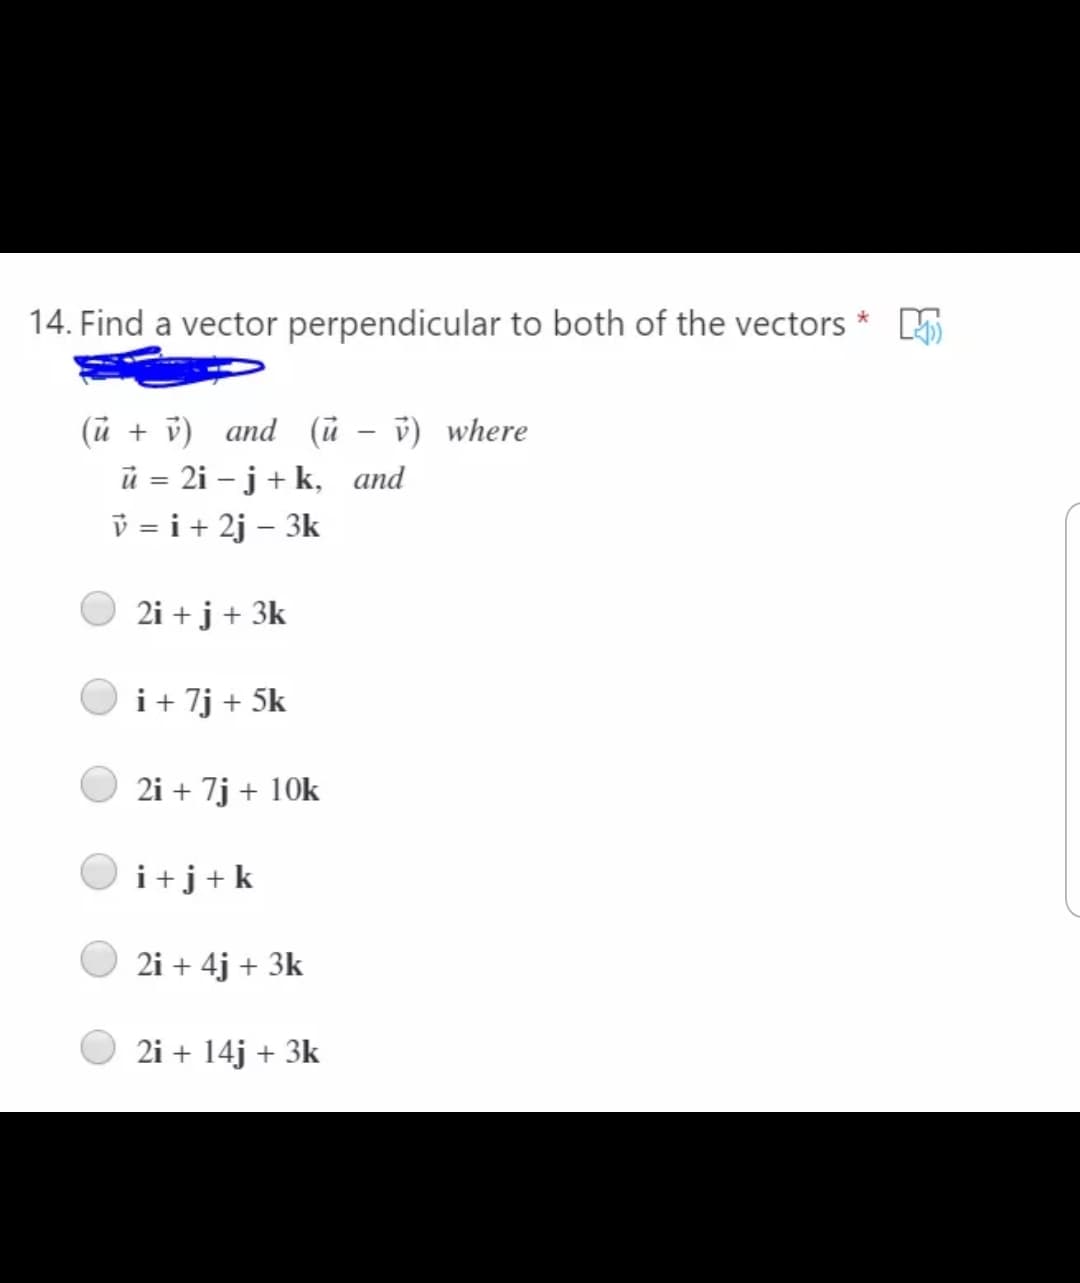 14. Find a vector perpendicular to both of the vectors * 5
(ũ + v) and (ũ
v) where
ü = 2i – j+ k, and
v = i+ 2j – 3k
|
2i + j + 3k
i+ 7j + 5k
2i + 7j + 10k
i+j+k
2i + 4j + 3k
2i + 14j + 3k
